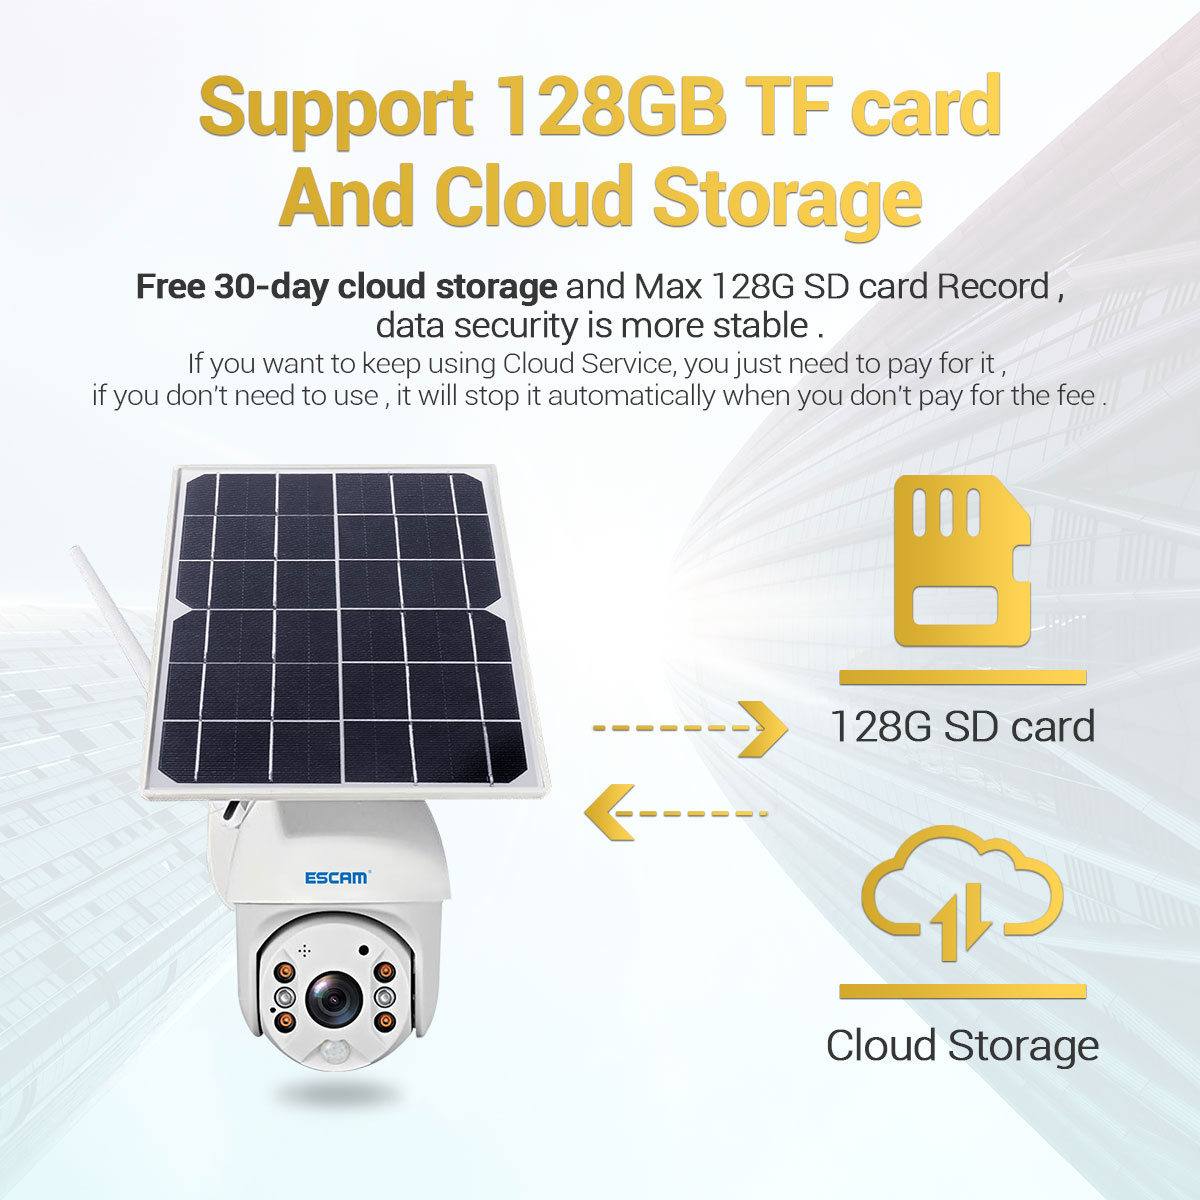 ESCAM QF280 support TF card